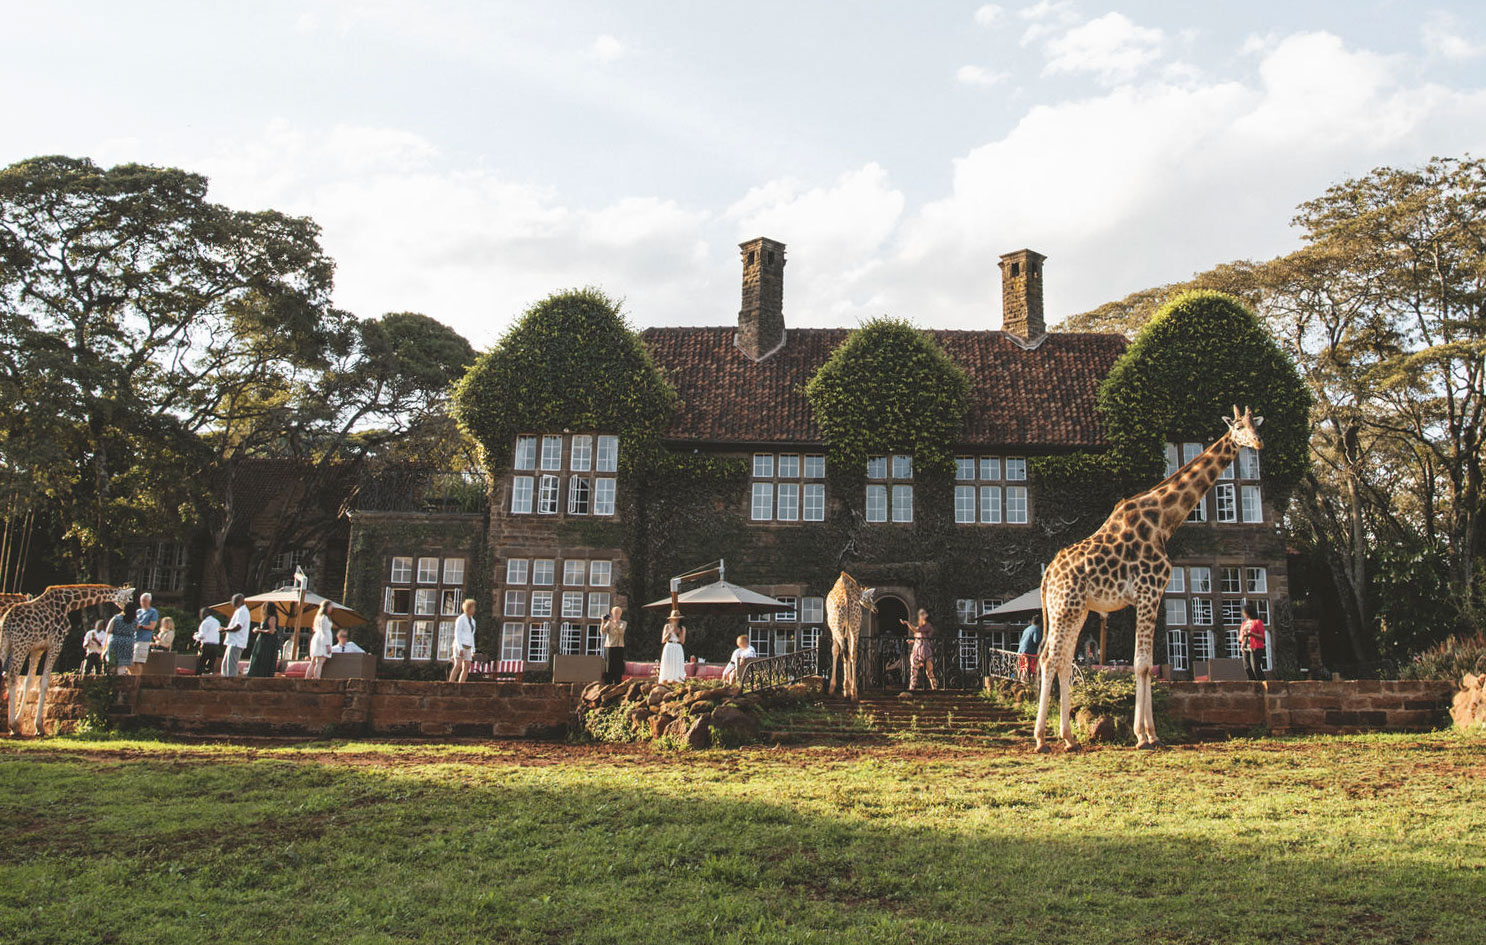 Nowadays, guests at Giraffe Manor are able to feed giraffes from the hotel's patio 